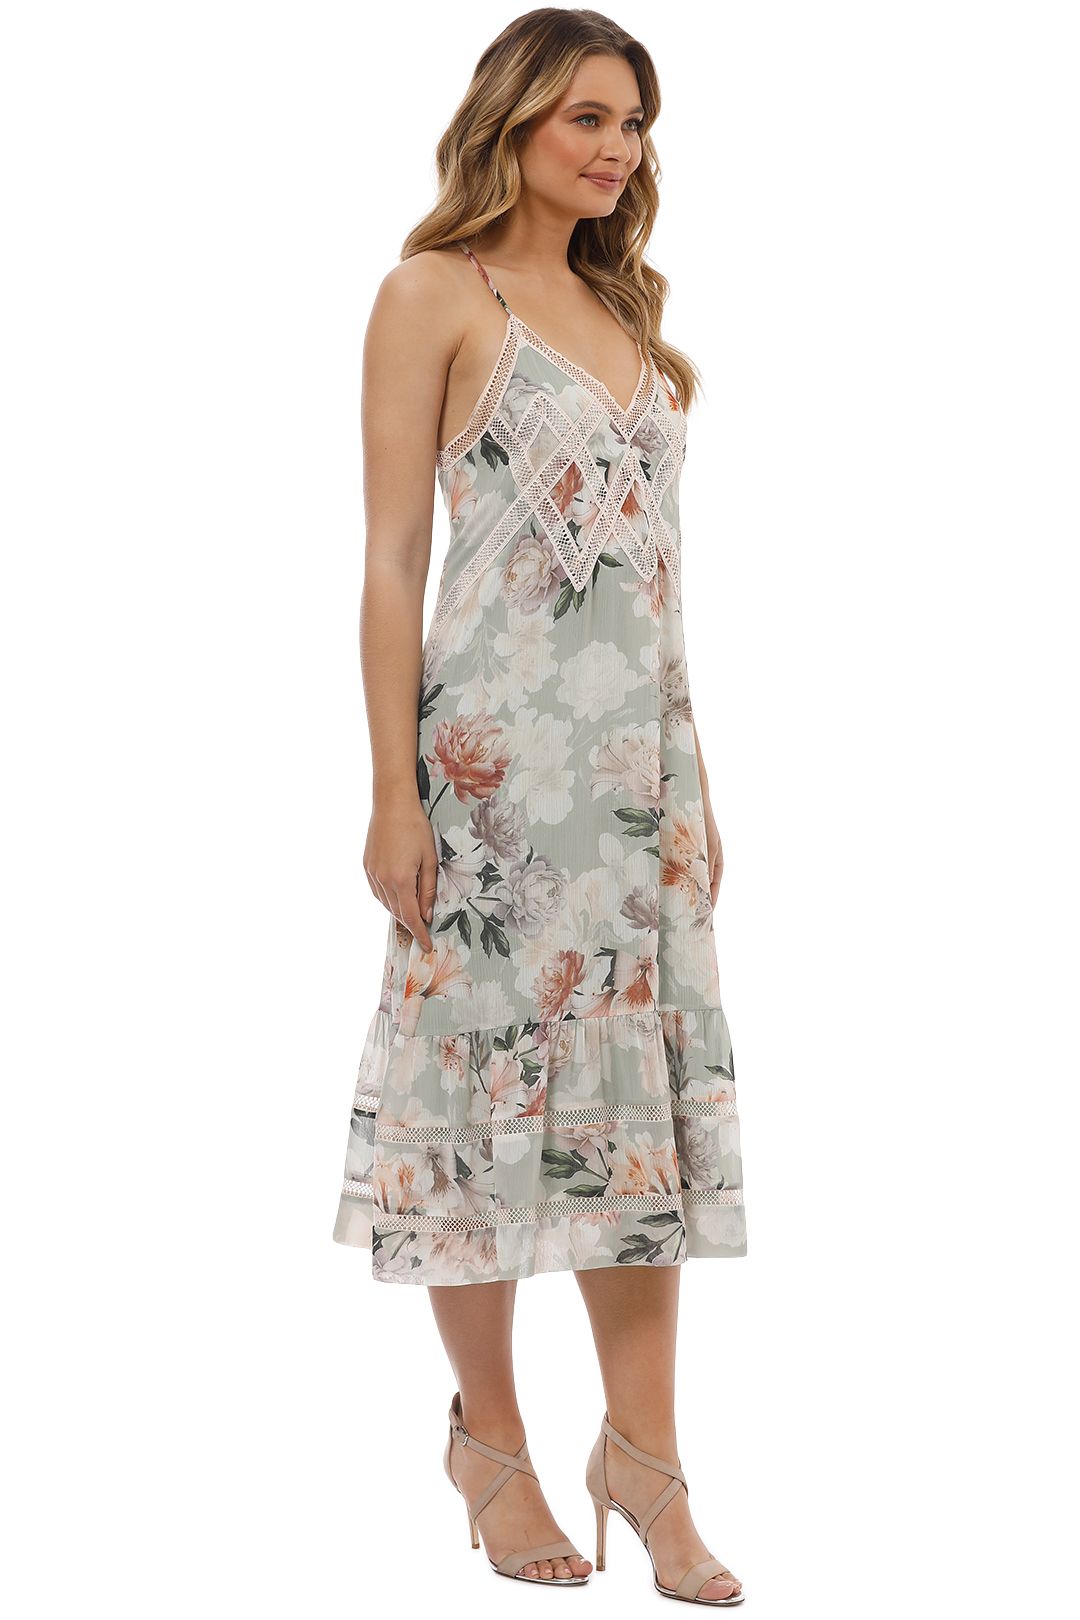 We Are Kindred - Magnolia Midi Dress - Green Floral - Side